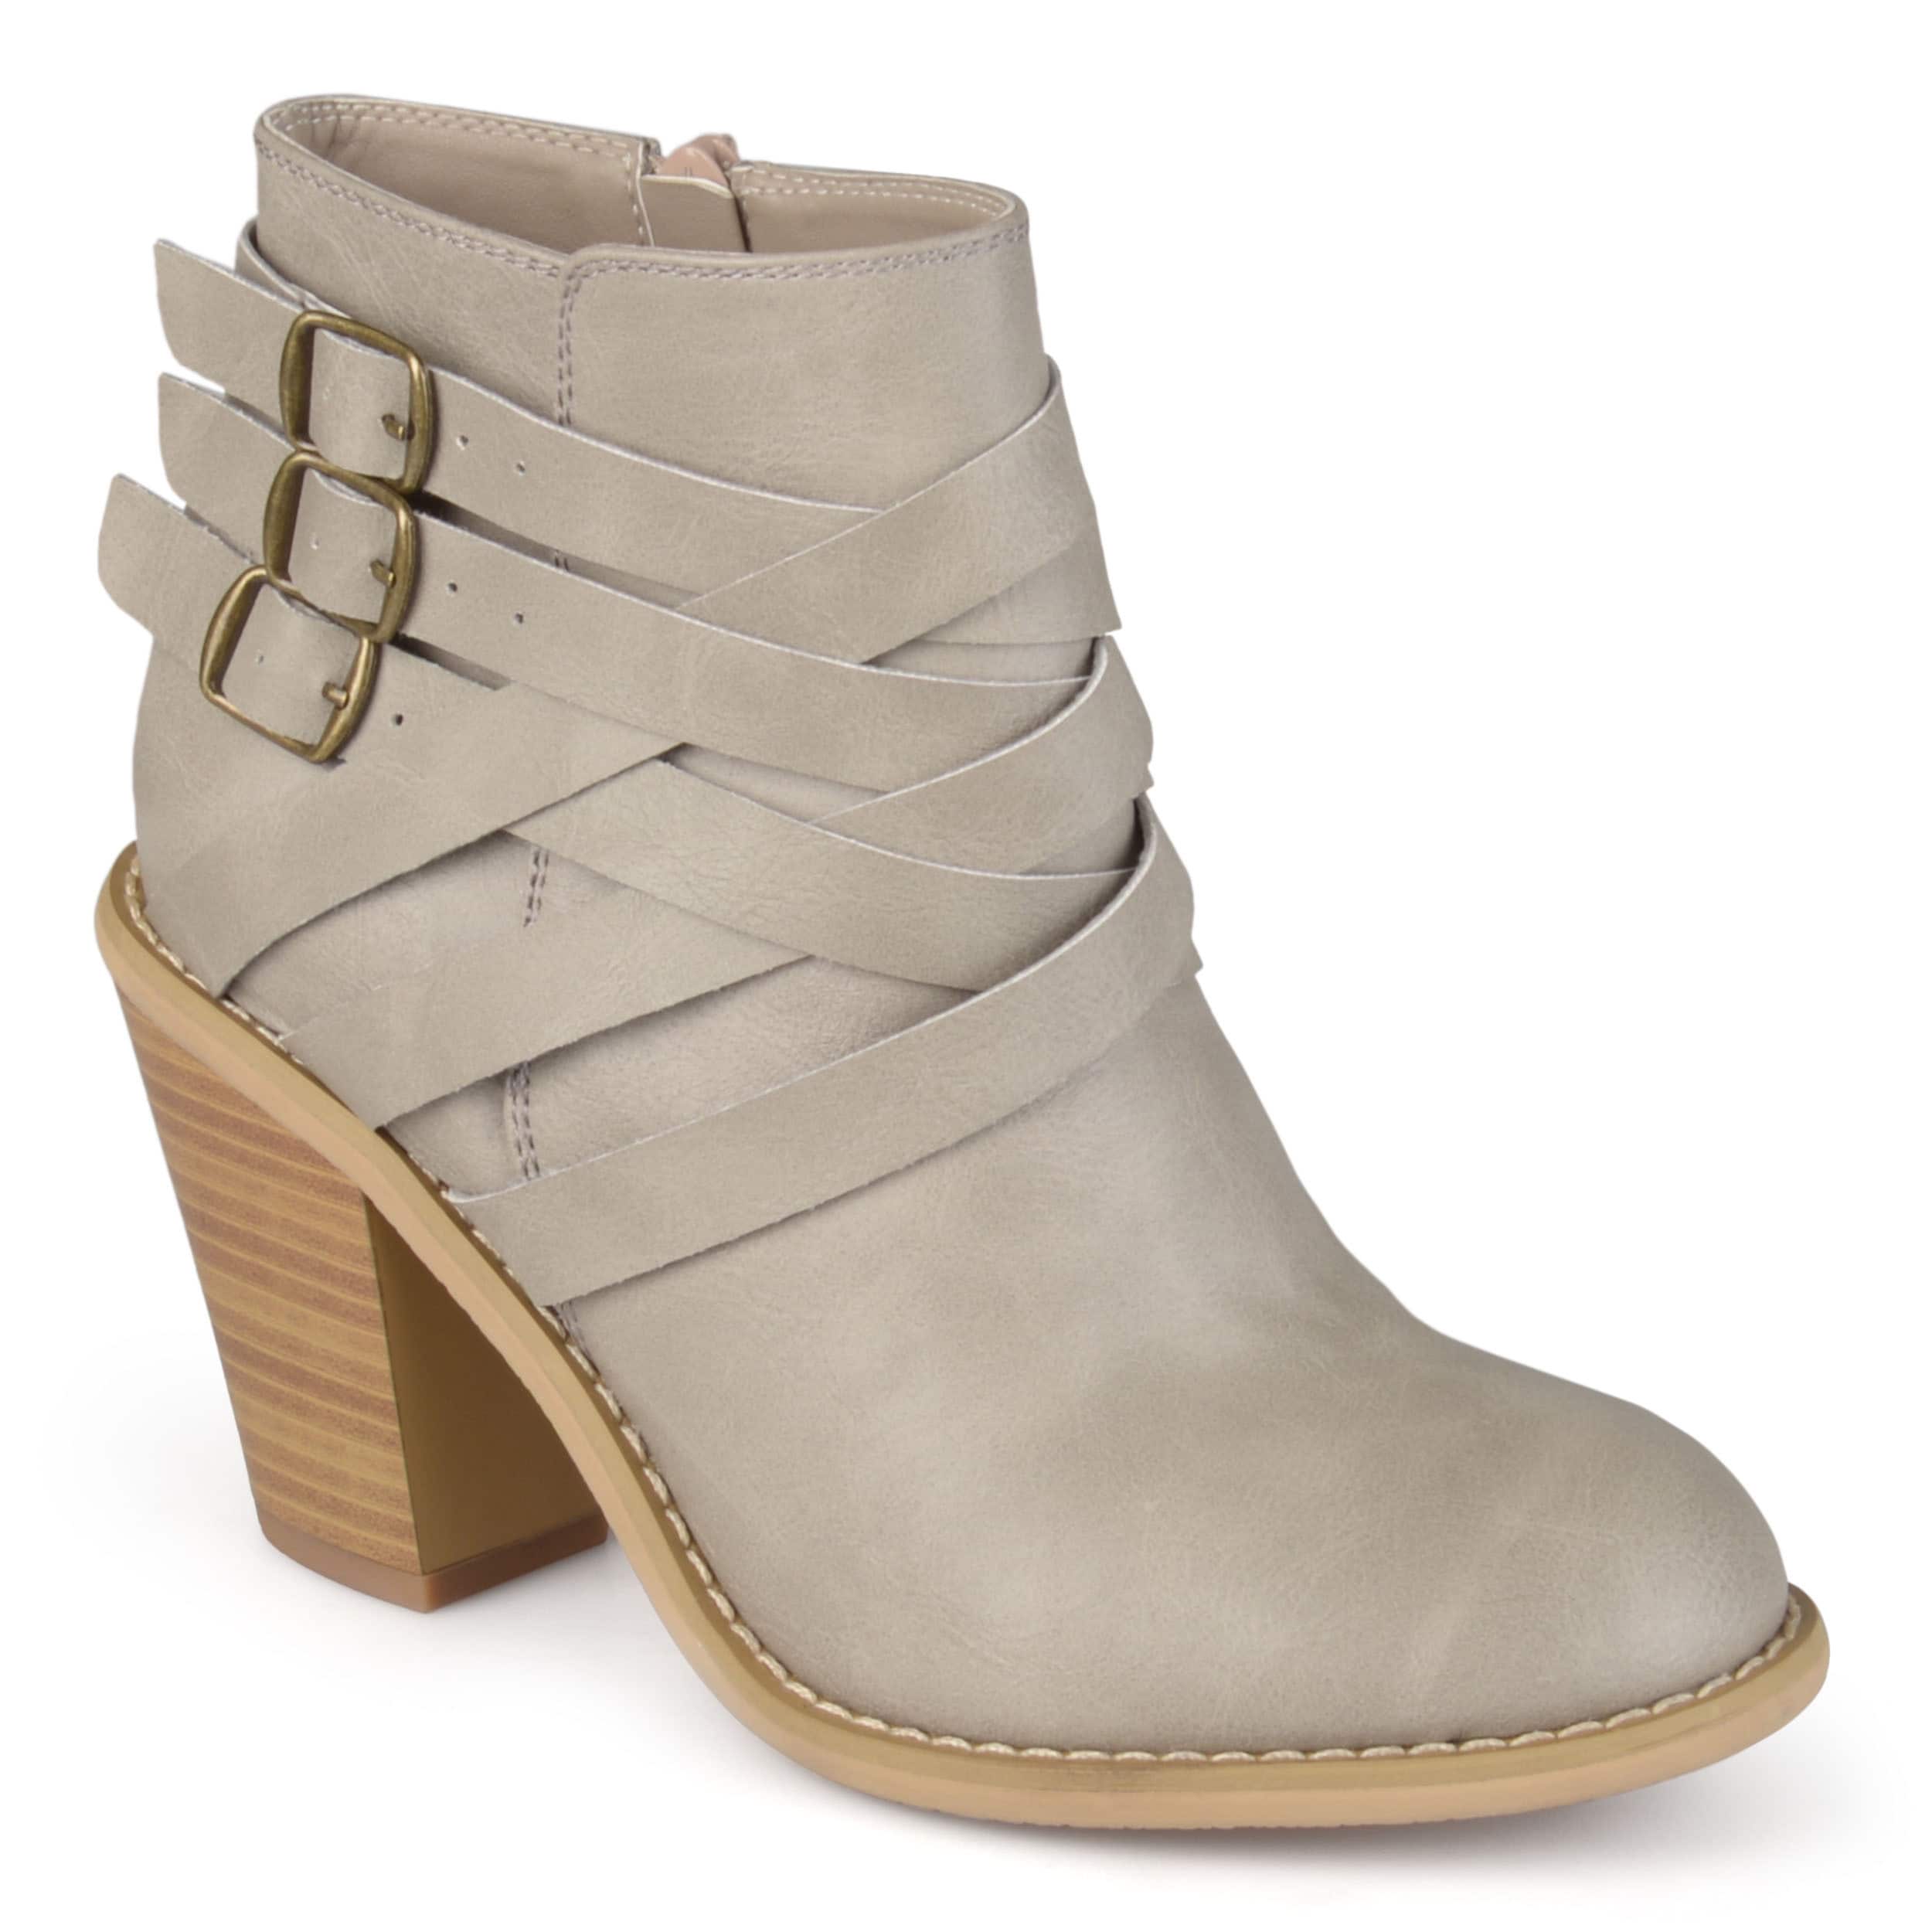 7's style women's boots